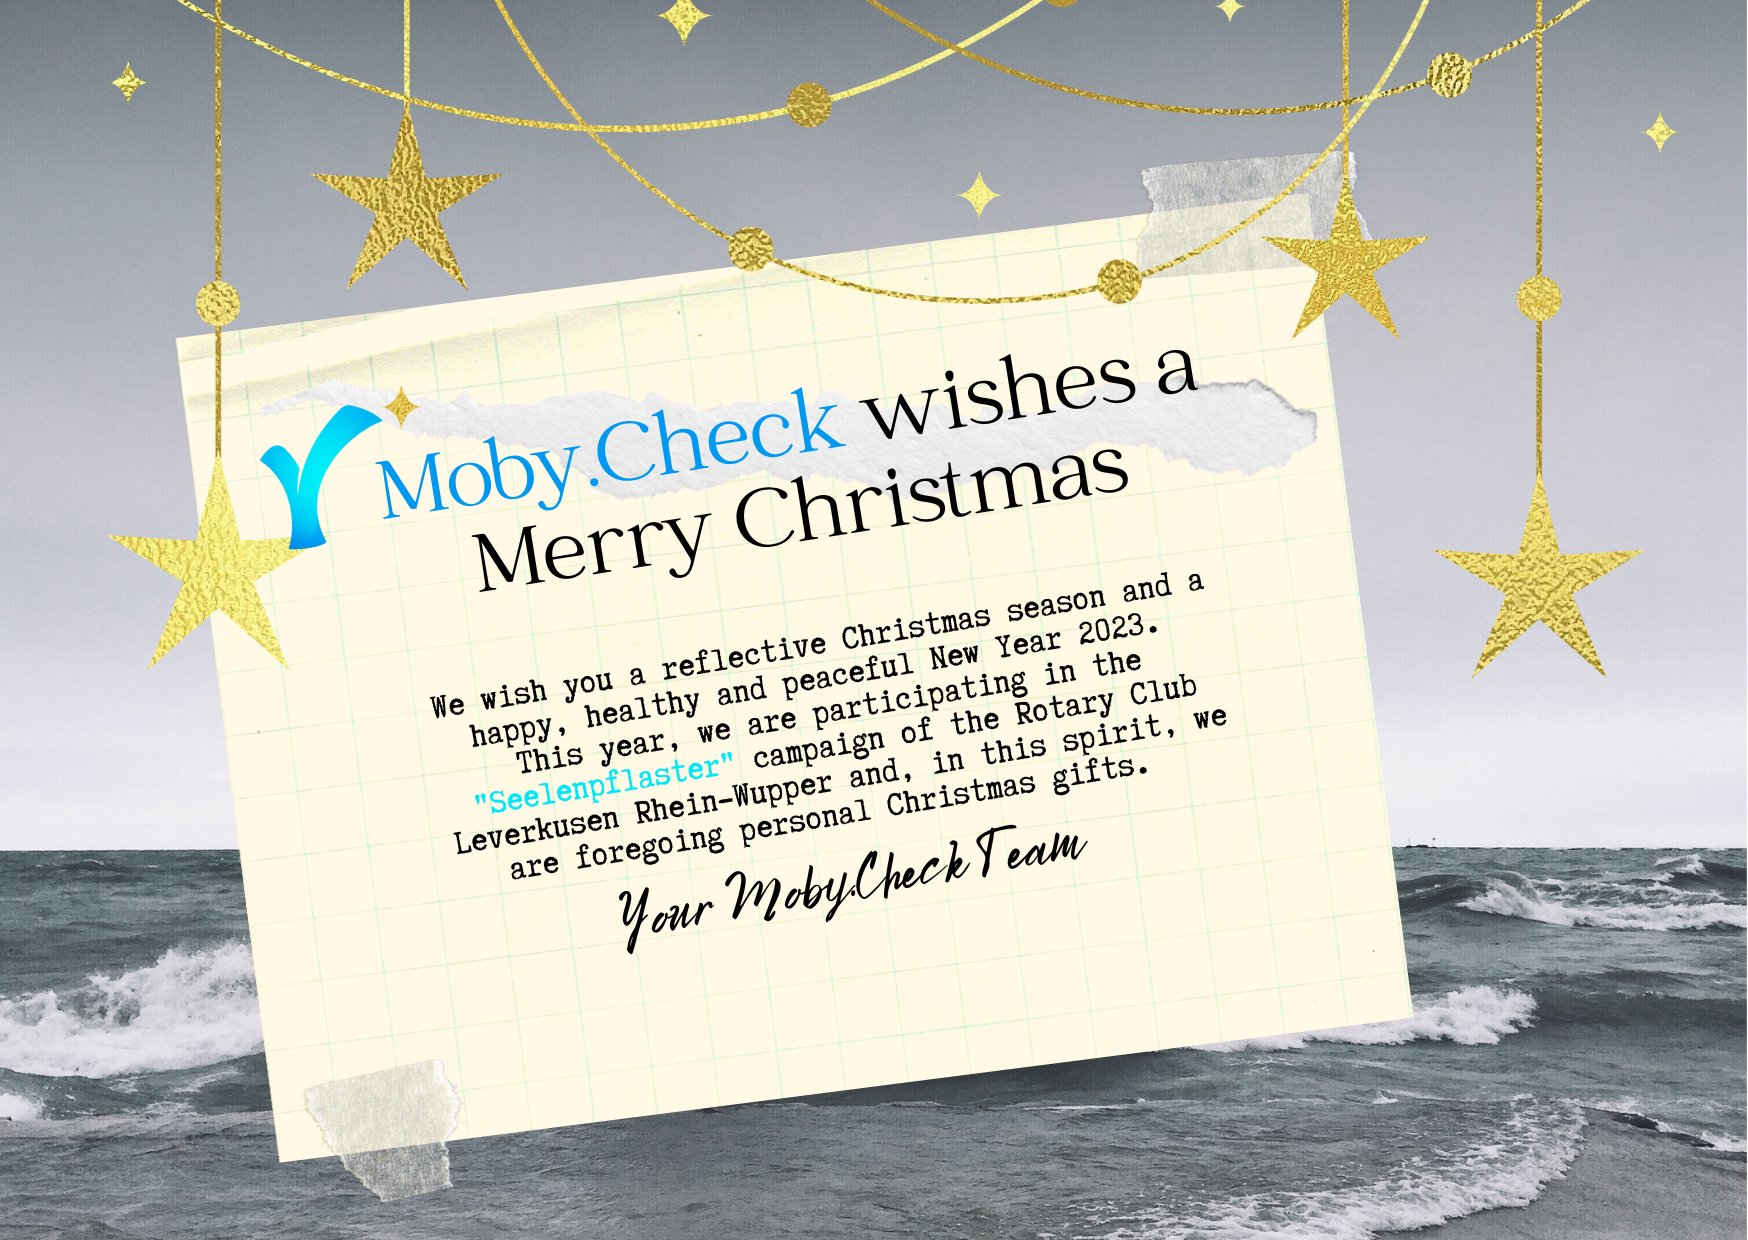 Moby.Check wishes a Merry Christmas